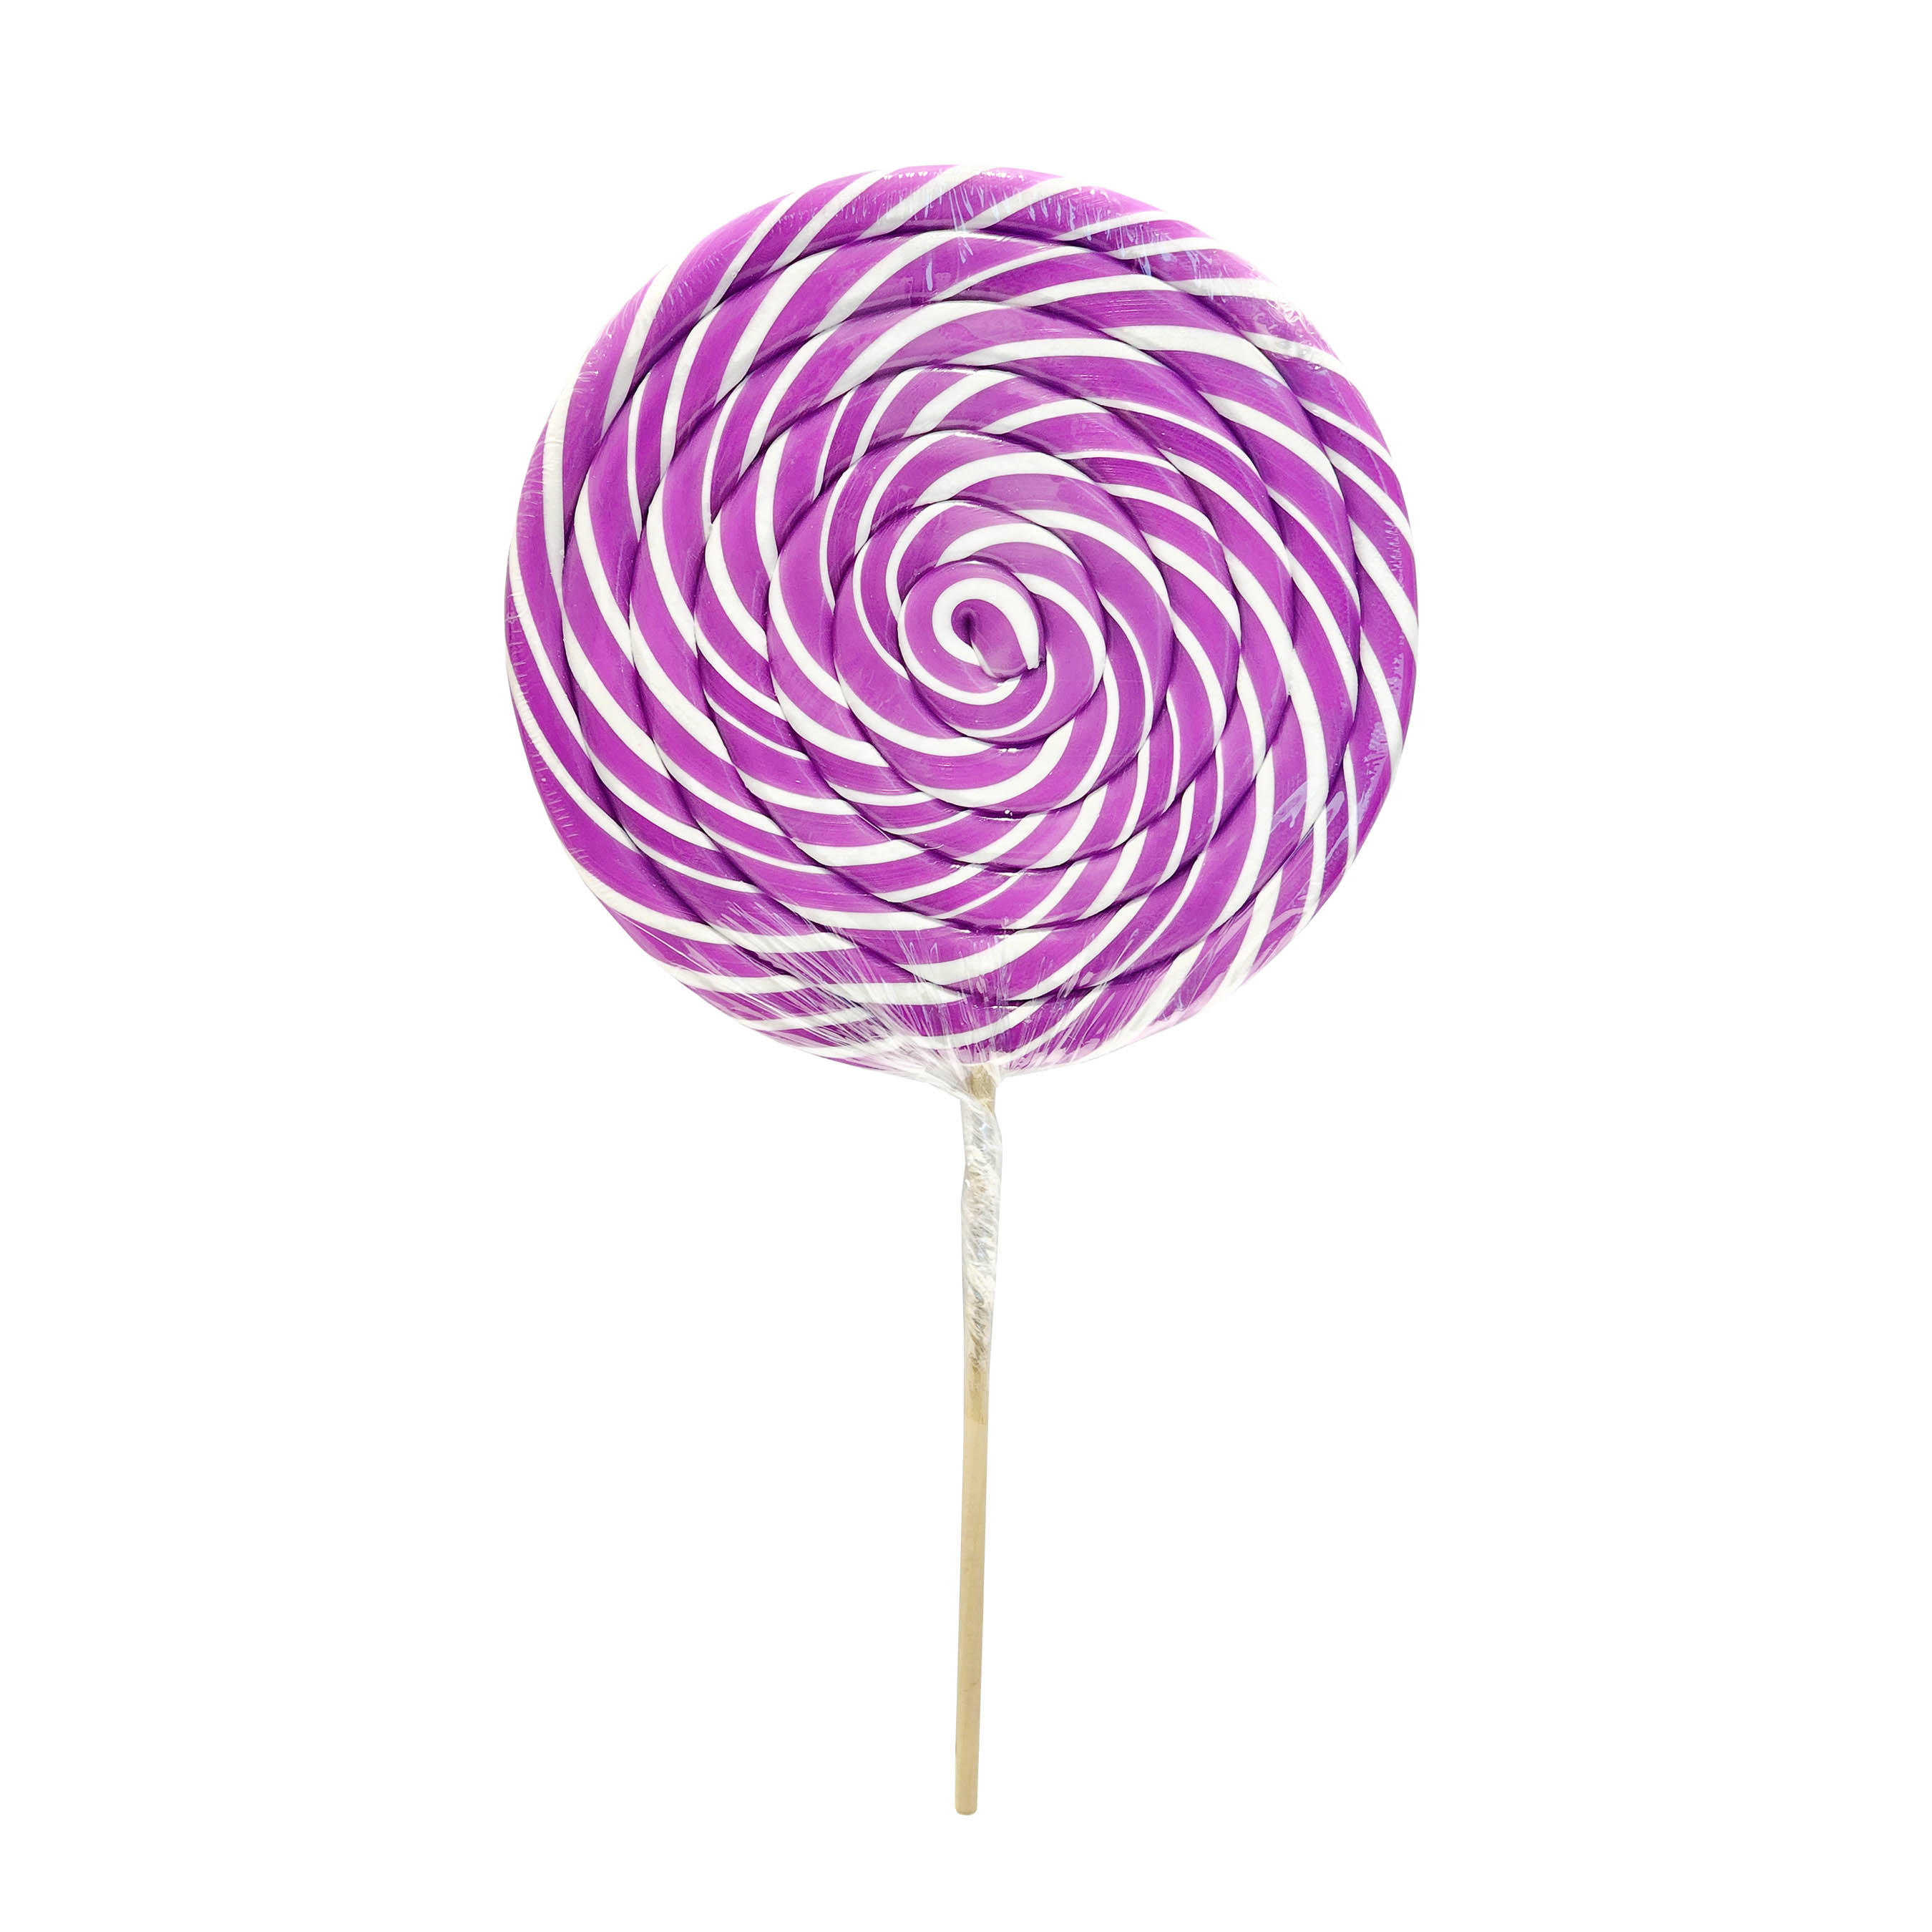 Grape flavored extra large swhirly sweet whirls 